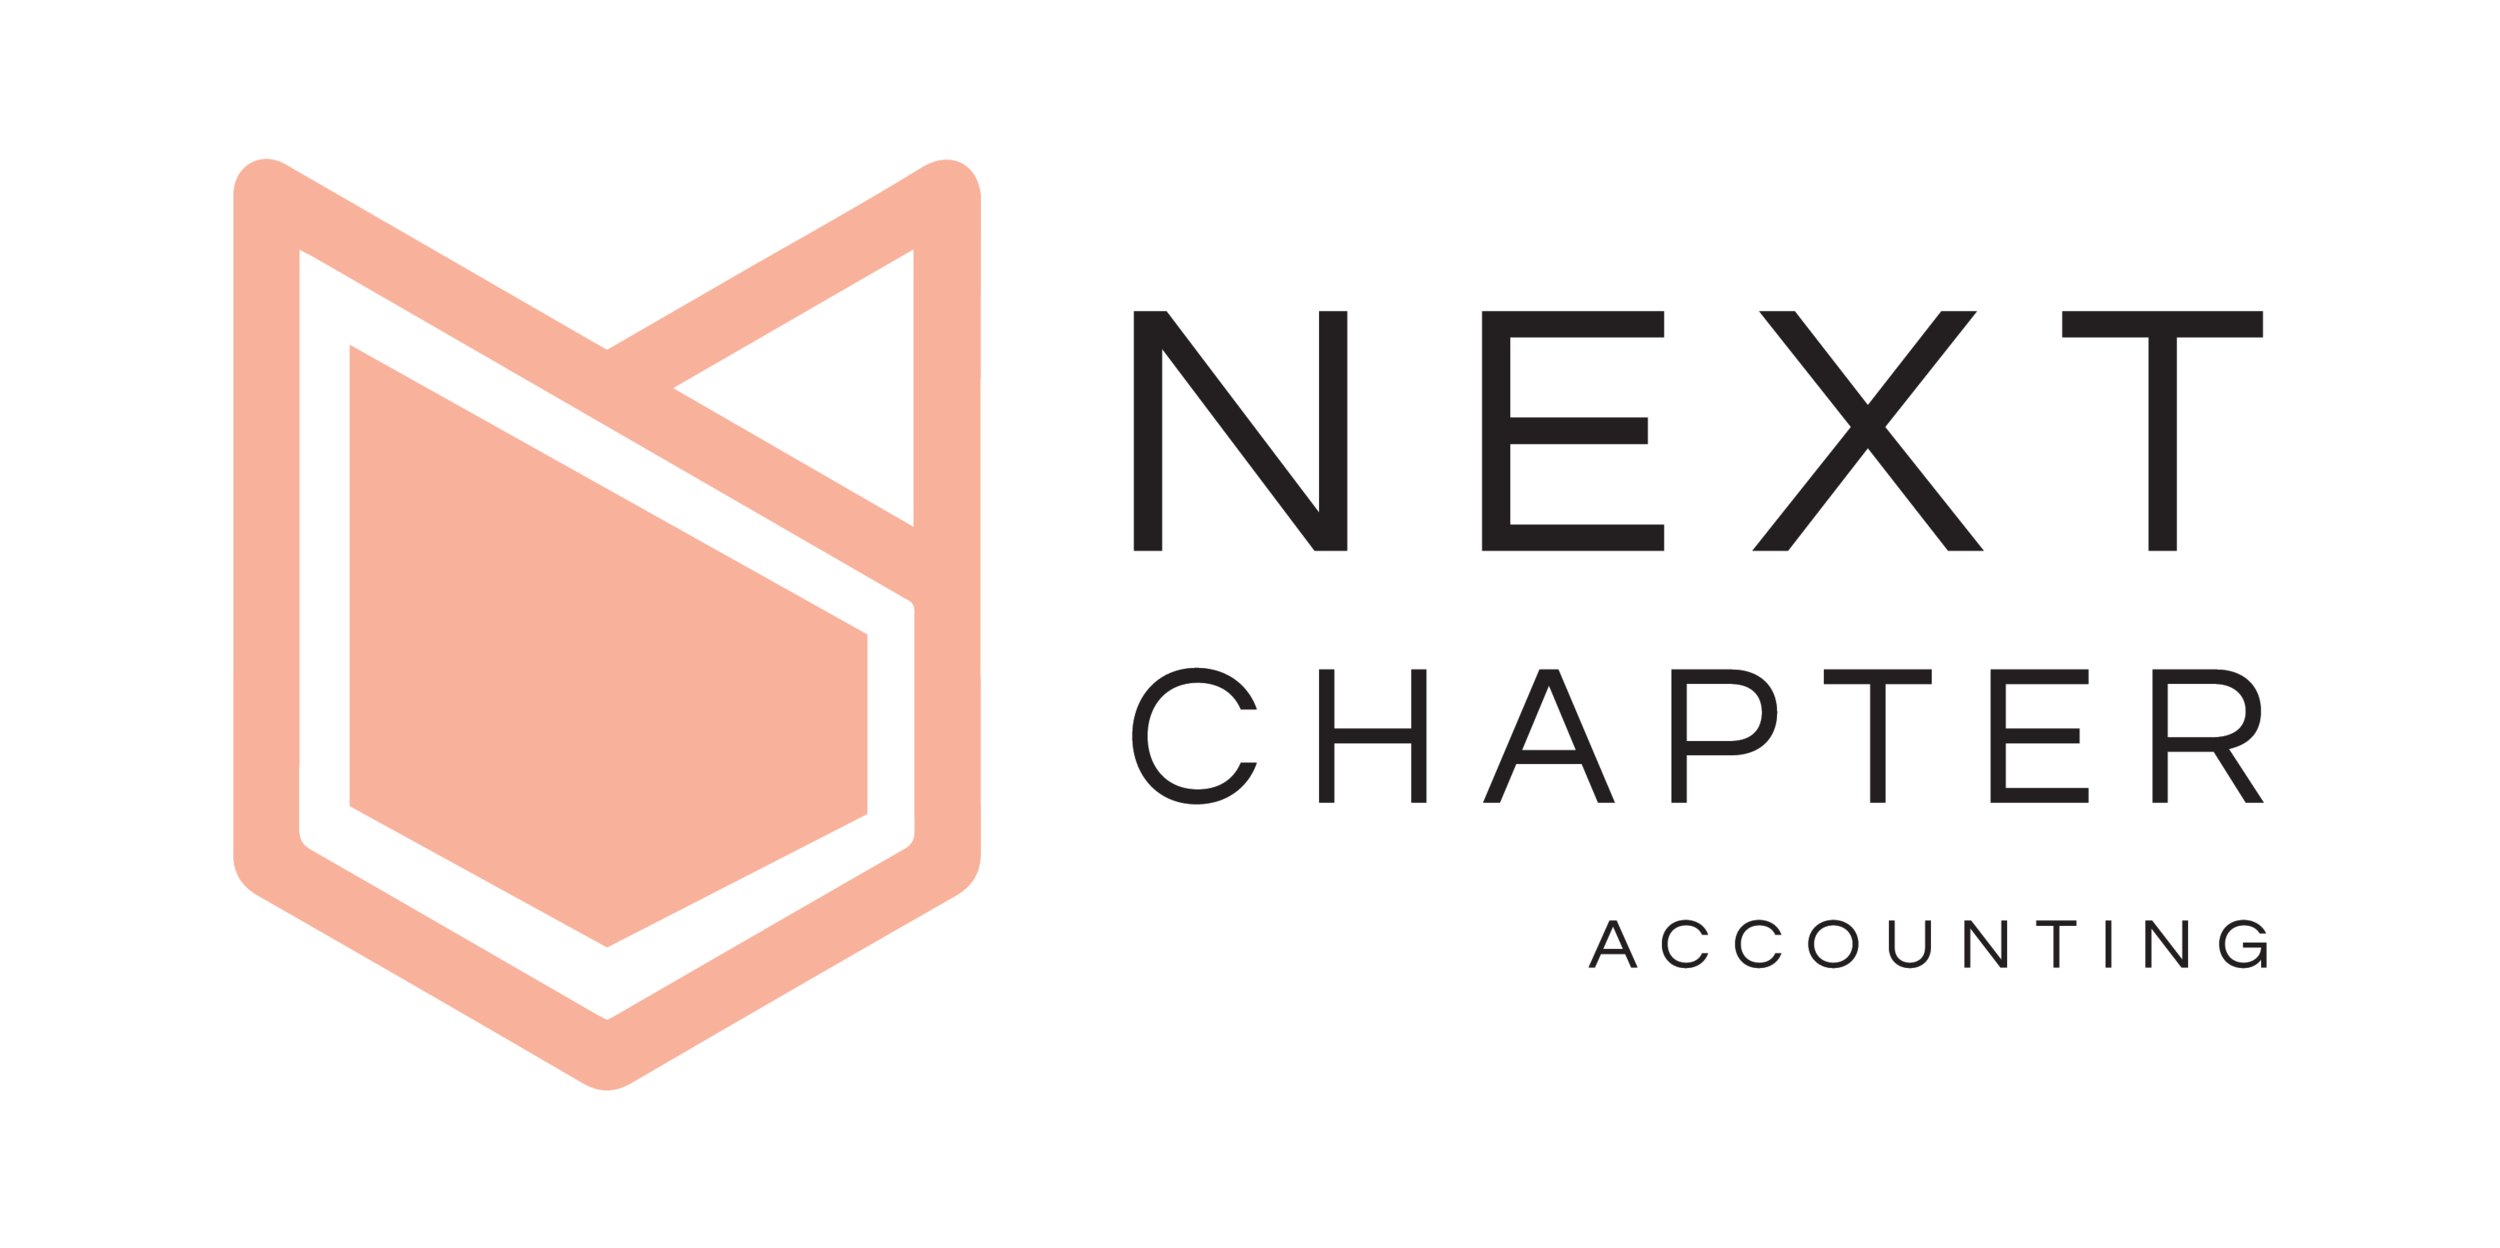 Next Chapter Accounting